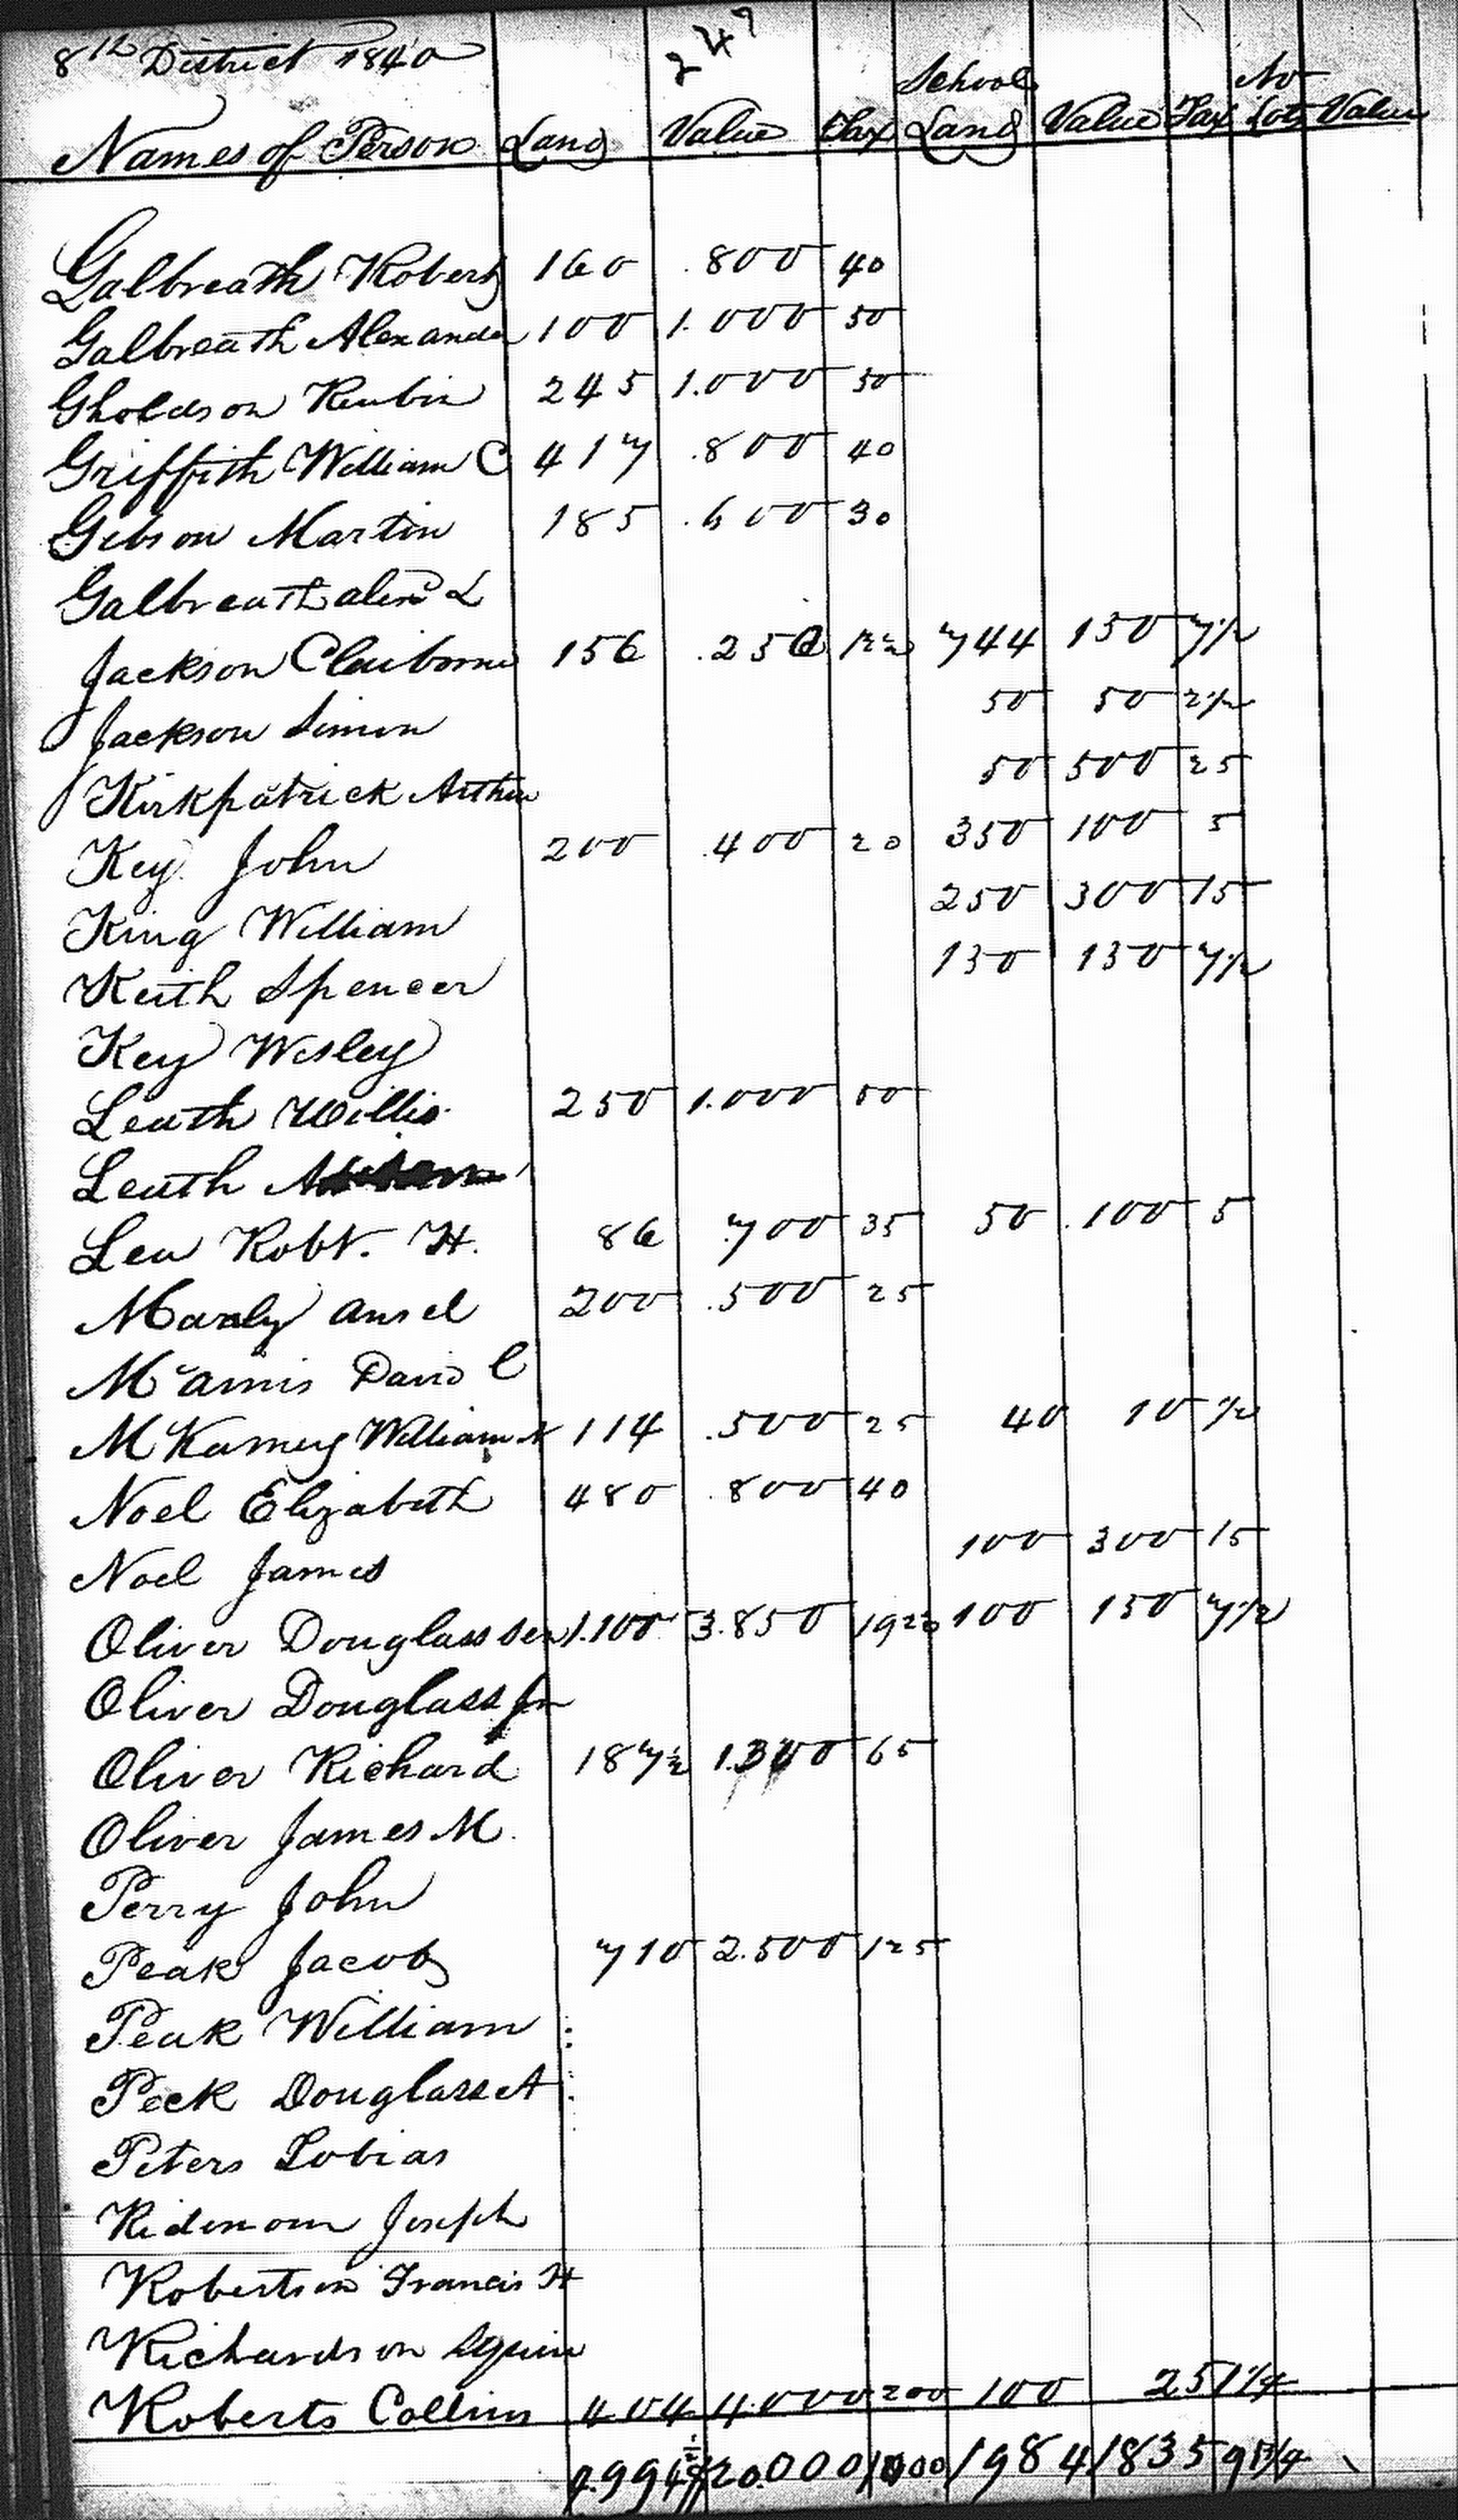 Anderson County Taxes, 1840, District 8, left half of first page